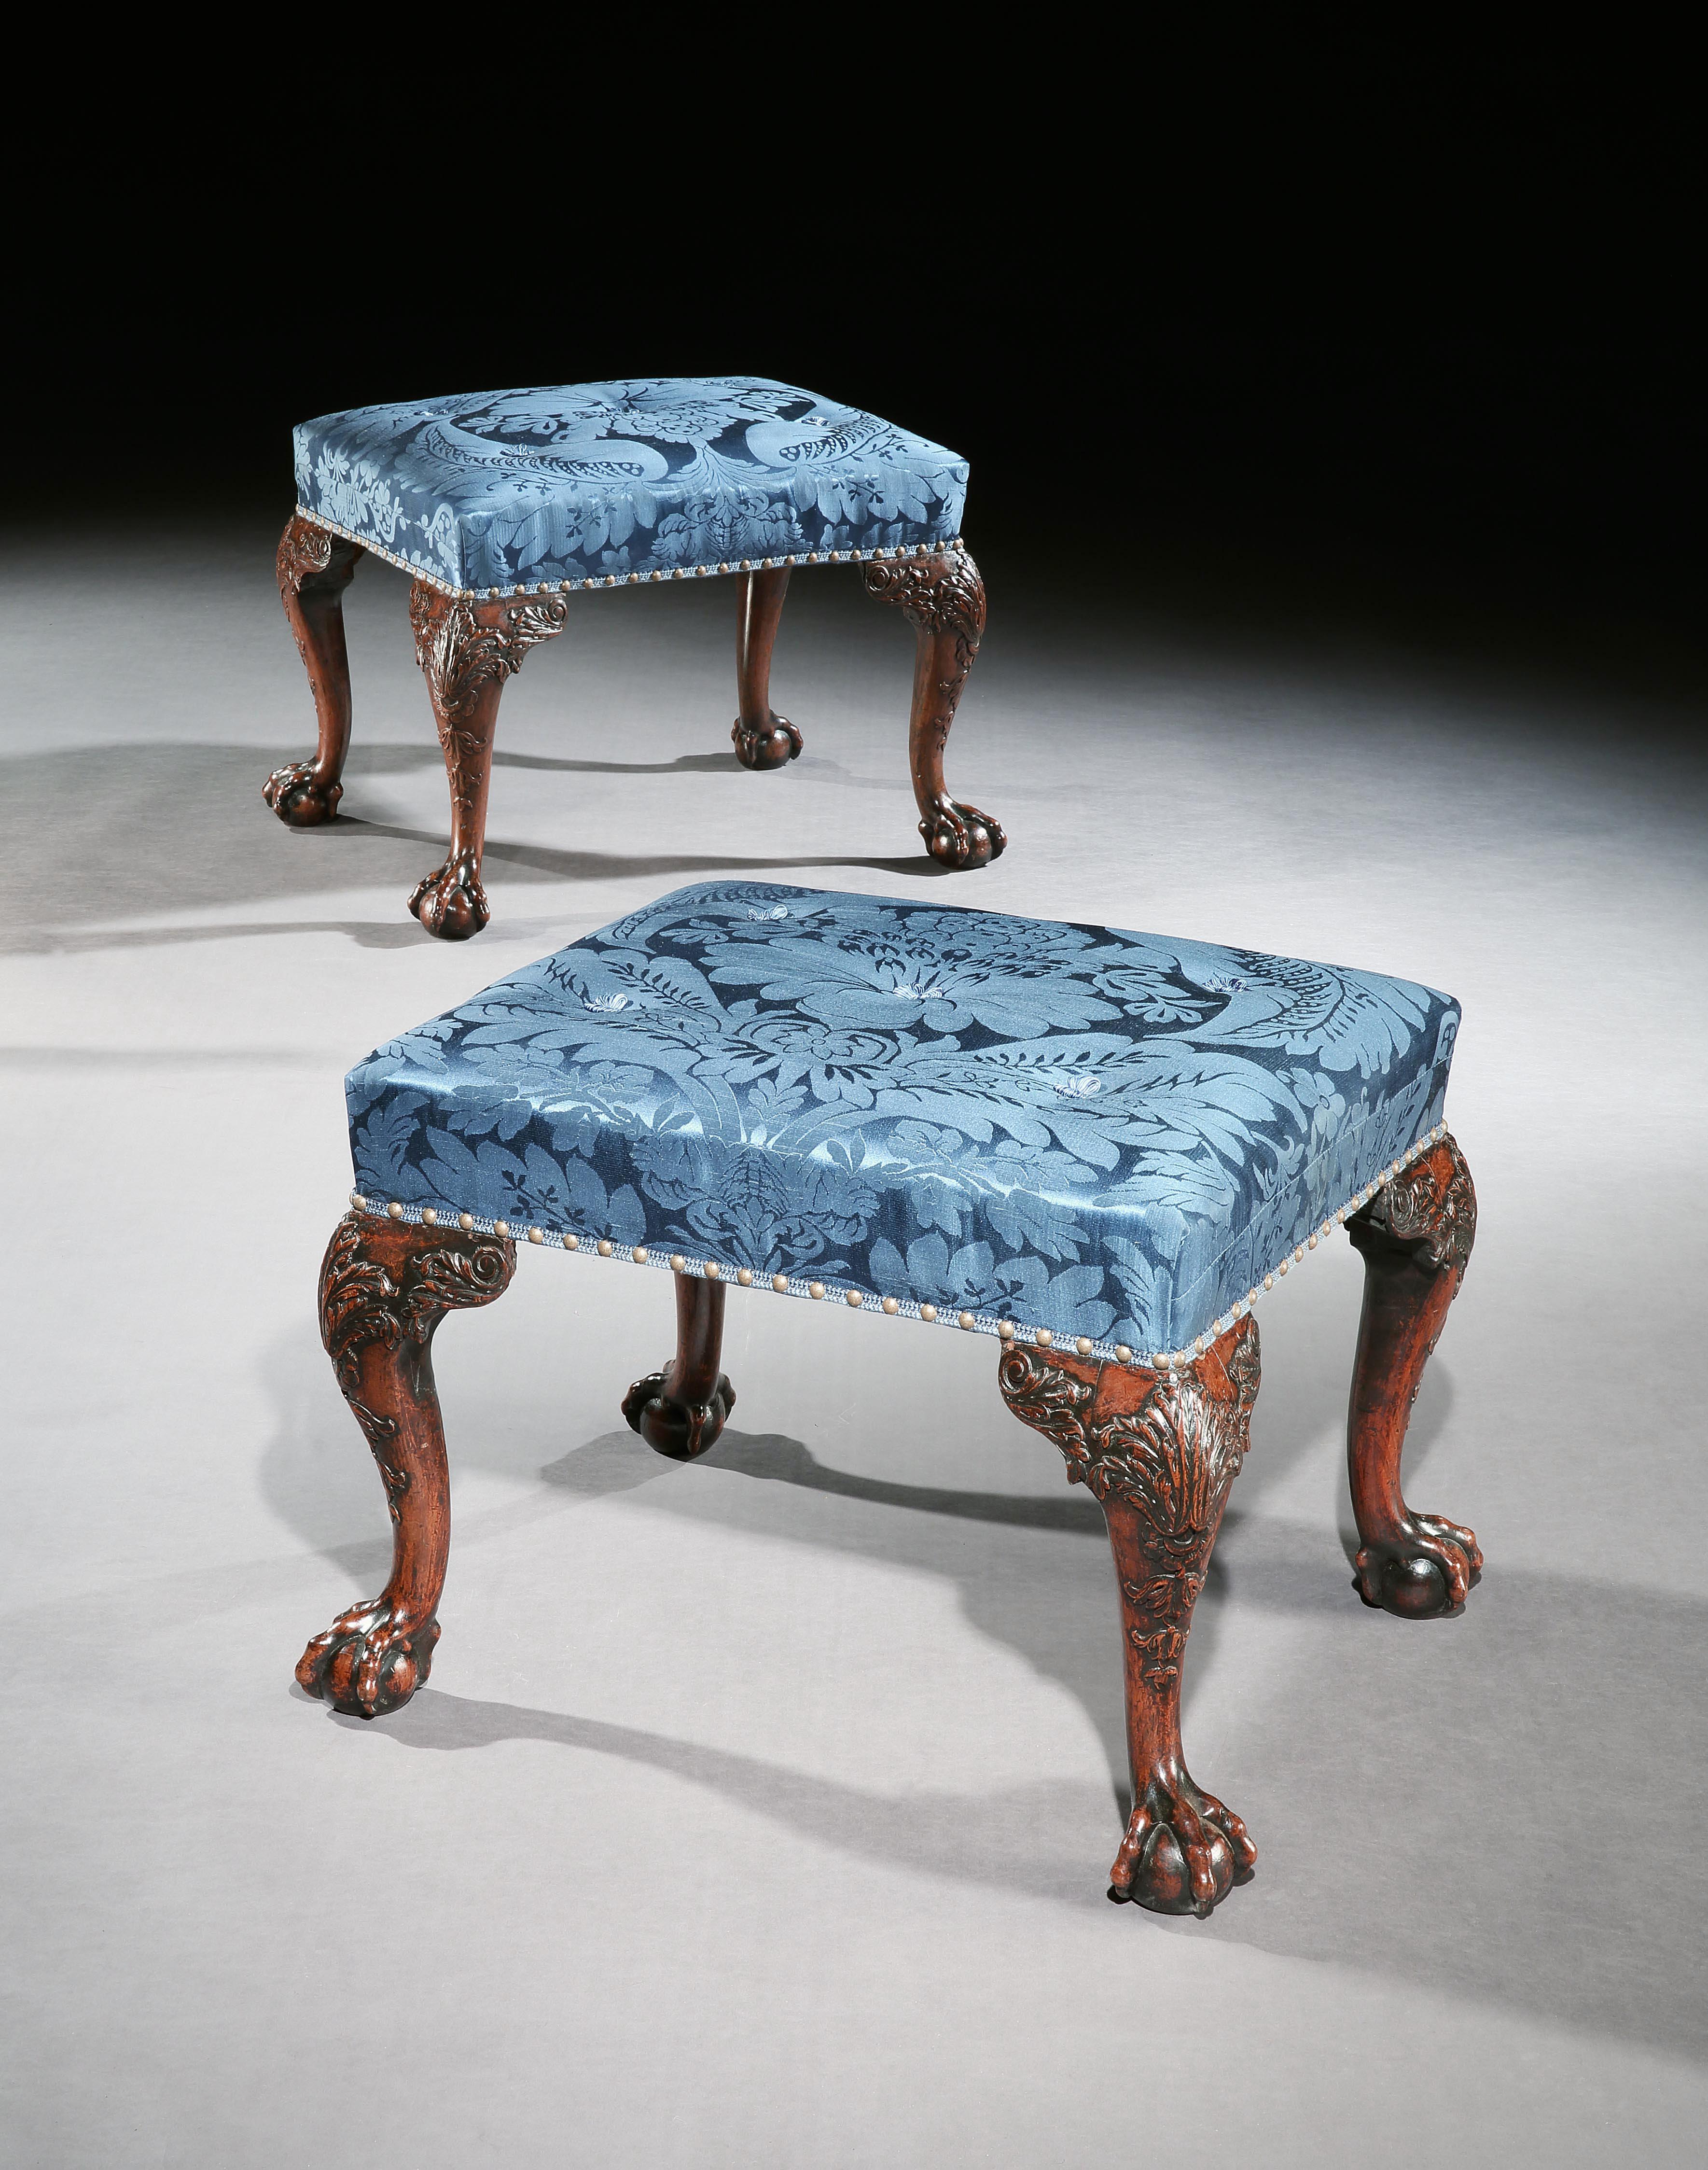 A pair of George III mahogany stools well carved with acanthus leaves and scrolls. Terminating in ball and claw feet, covered in a blue silk damask.

English, circa 1770.

This fabulous pair of stools remain in wonderful untouched condition.